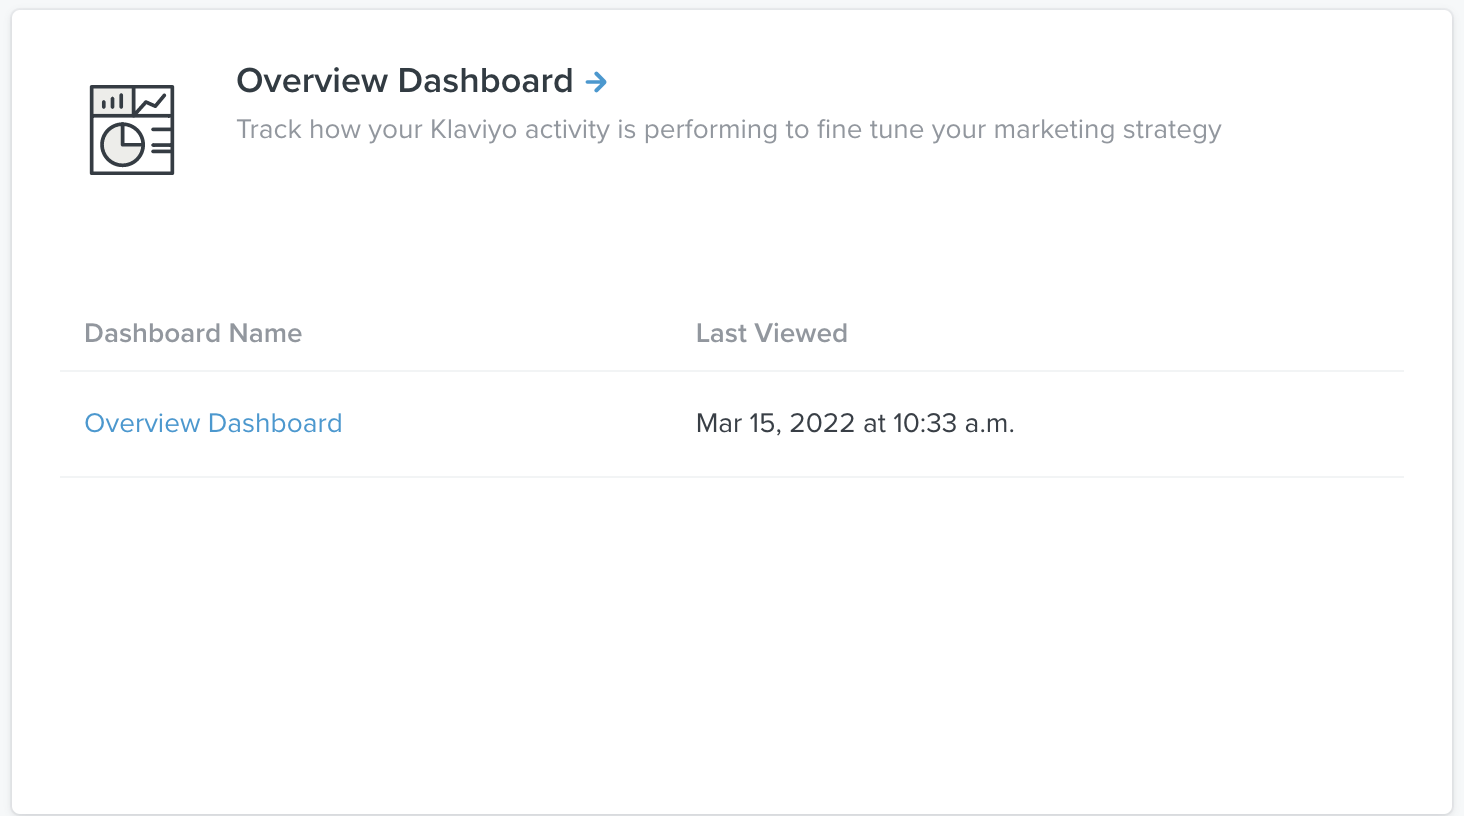 Inside the Analytics tab and selecting the Overview Dashboard card at top.